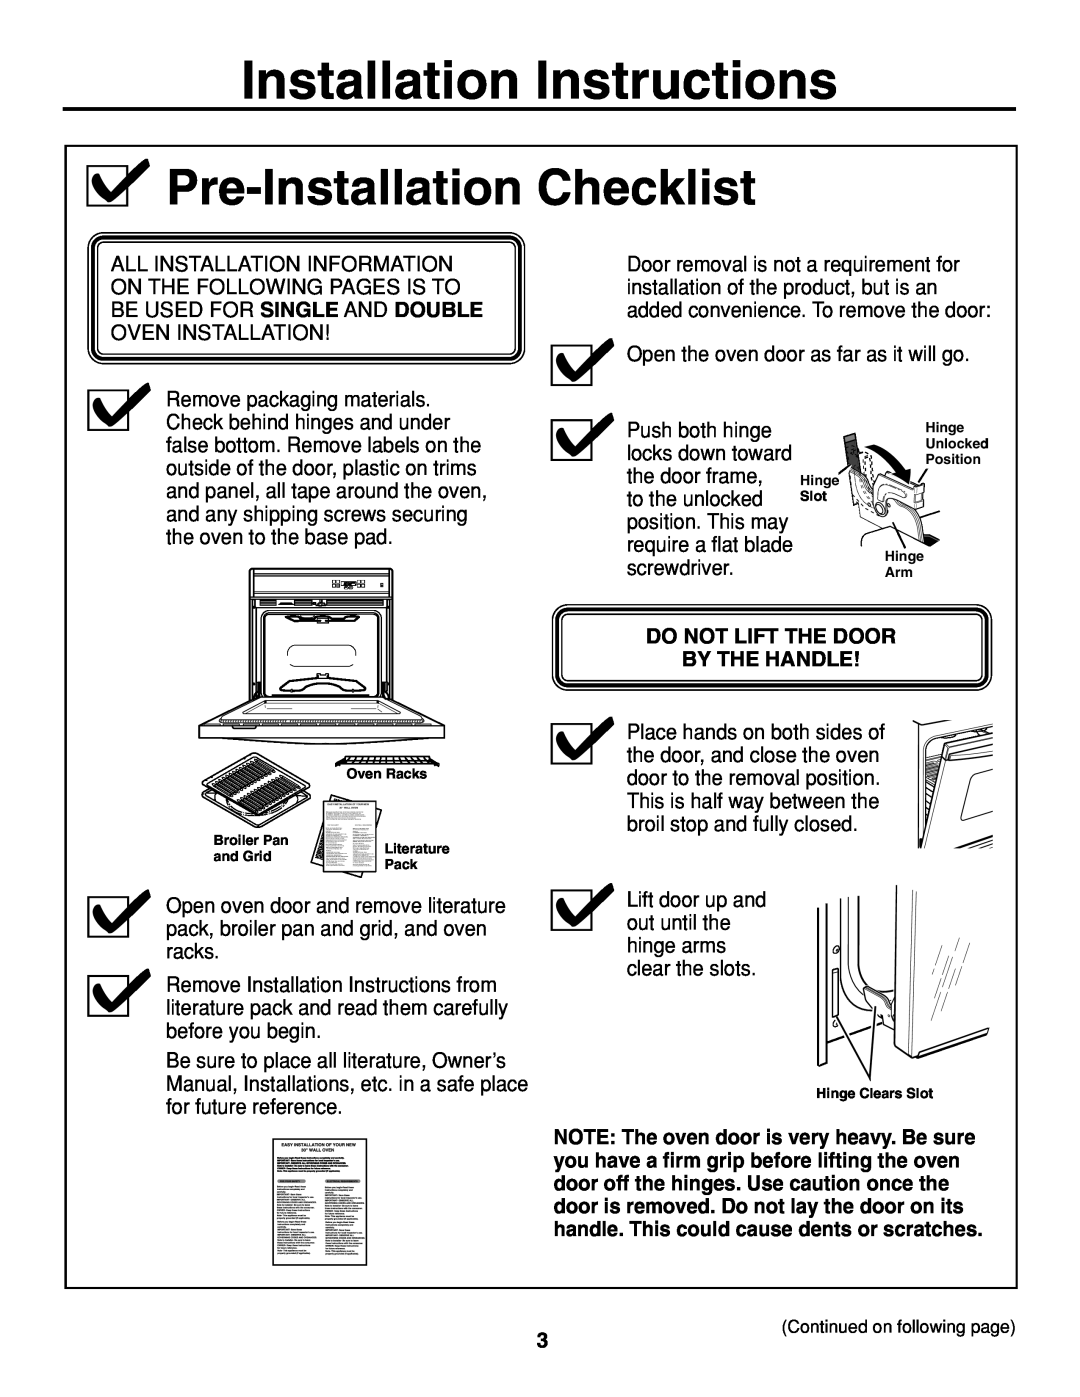 GE JTP20 Pre-Installation Checklist, Installation Instructions, Do Not Lift The Door By The Handle 